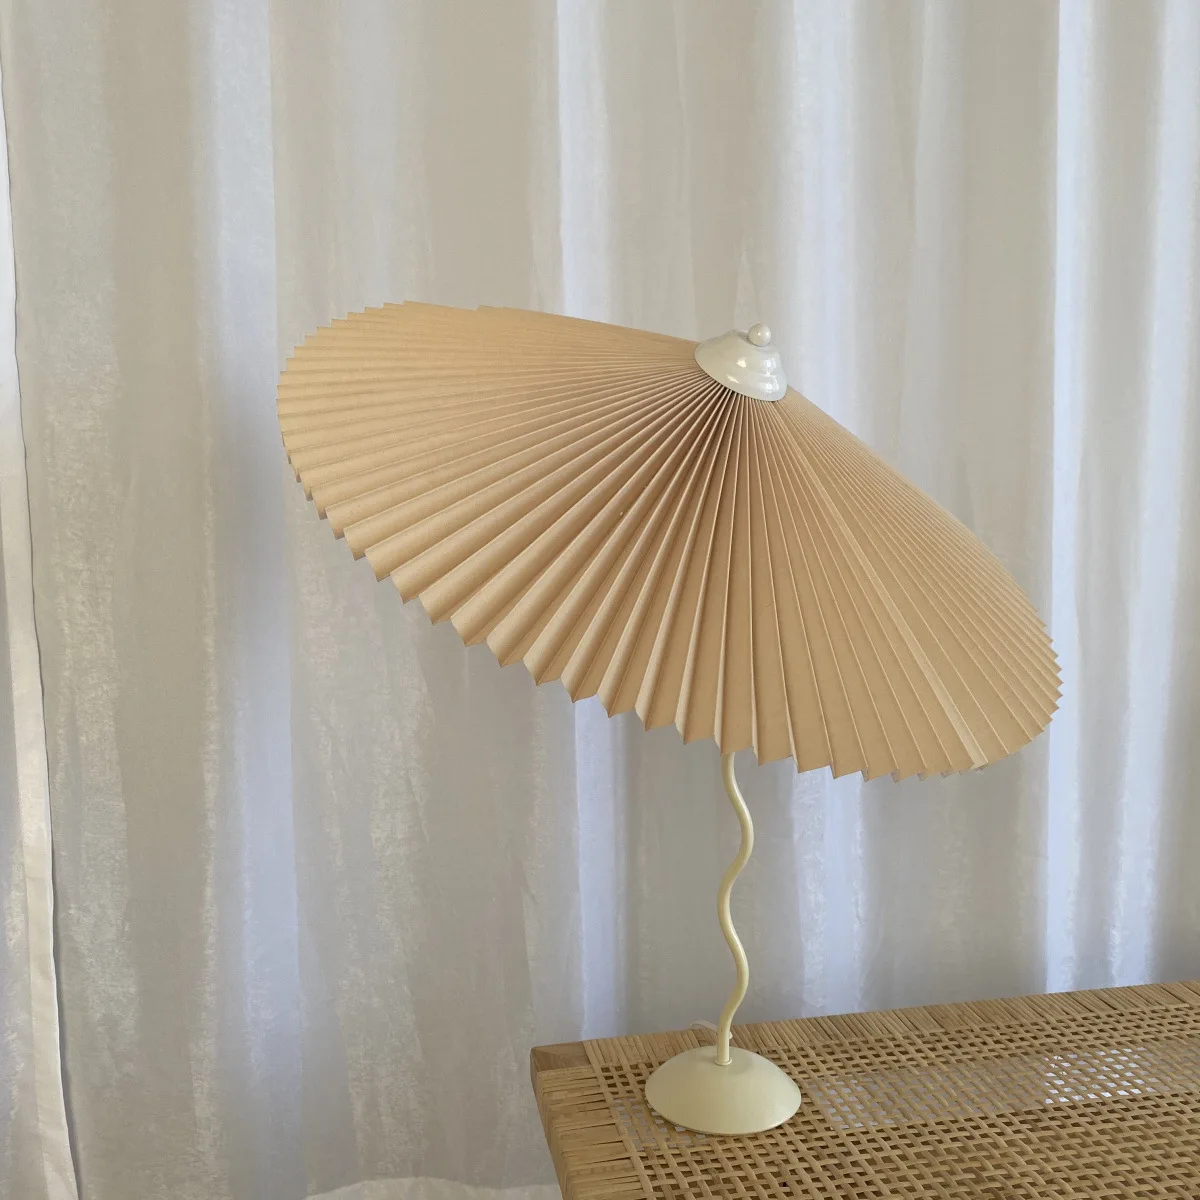 Pleated Umbrella Table Lamp Ins Swing Wrought Iron Master Bedroom Living Room Bedside Lamp E14 Lamp for Bedroom